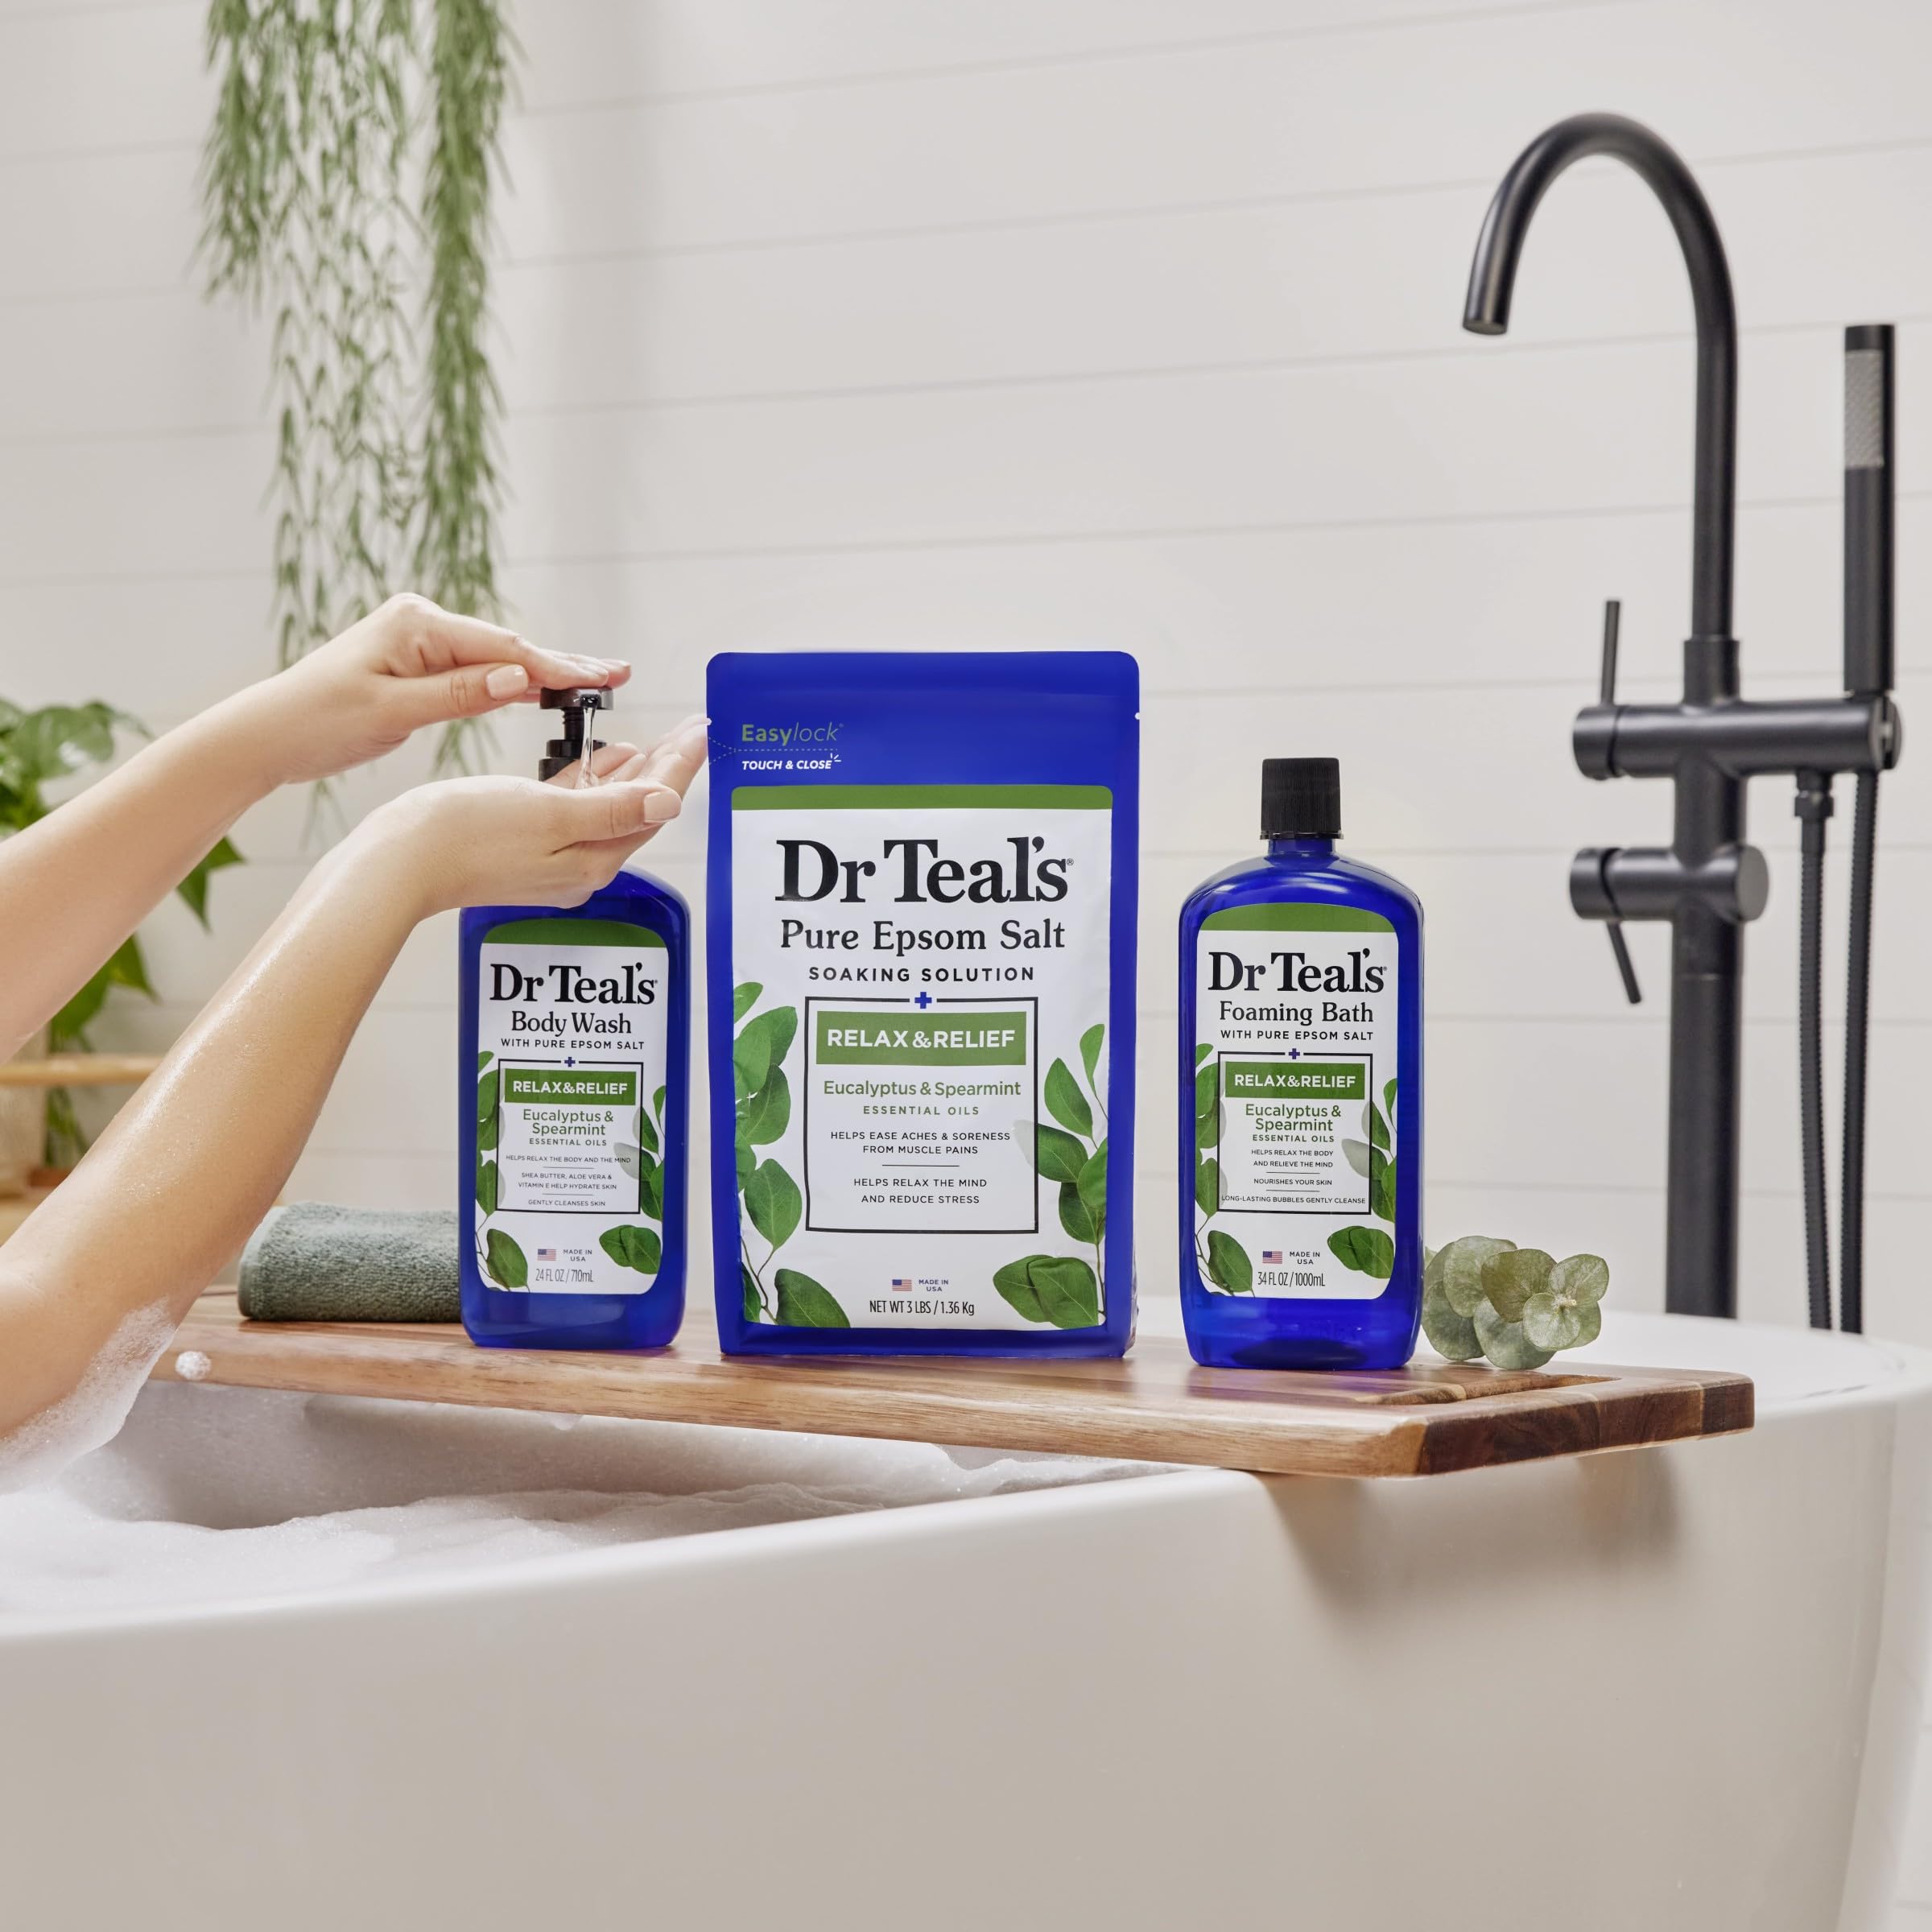 Dr Teal's Foaming Bath with Pure Epsom Salt, Relax & Relief with Eucalyptus & Spearmint, 34 fl oz (Pack of 2)